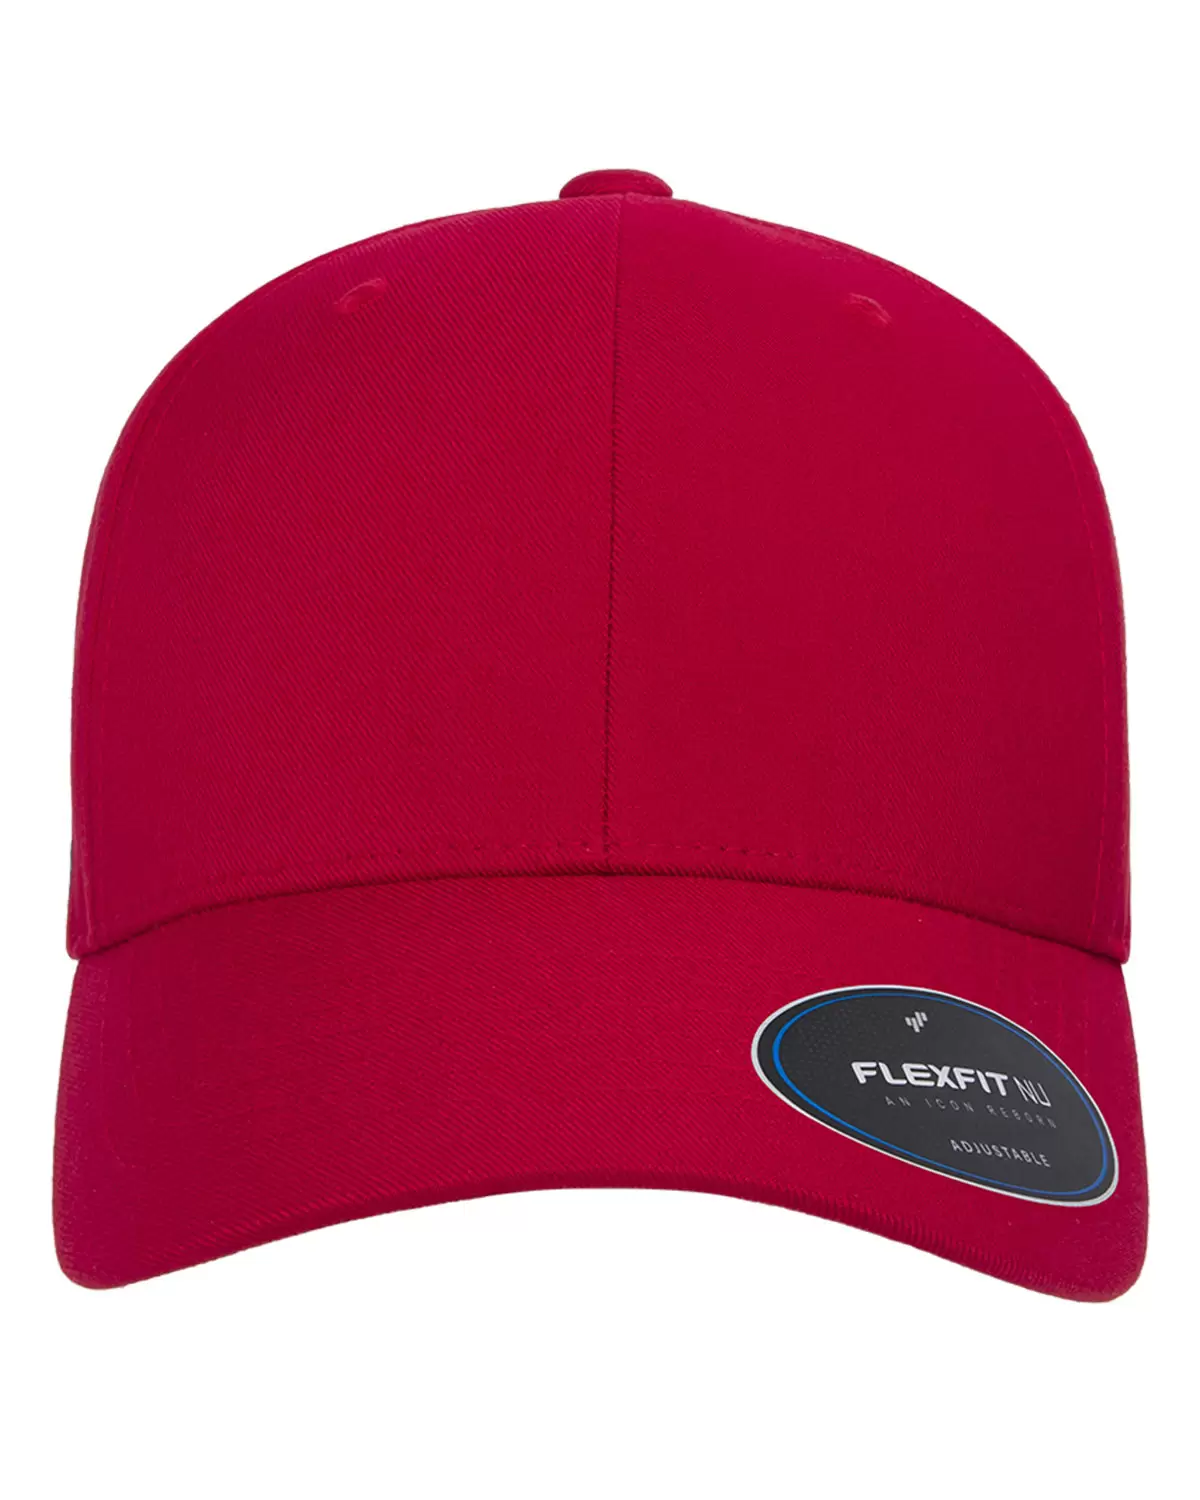 Yupoong-Flex Fit 6110NU NU - Cap Adjustable From